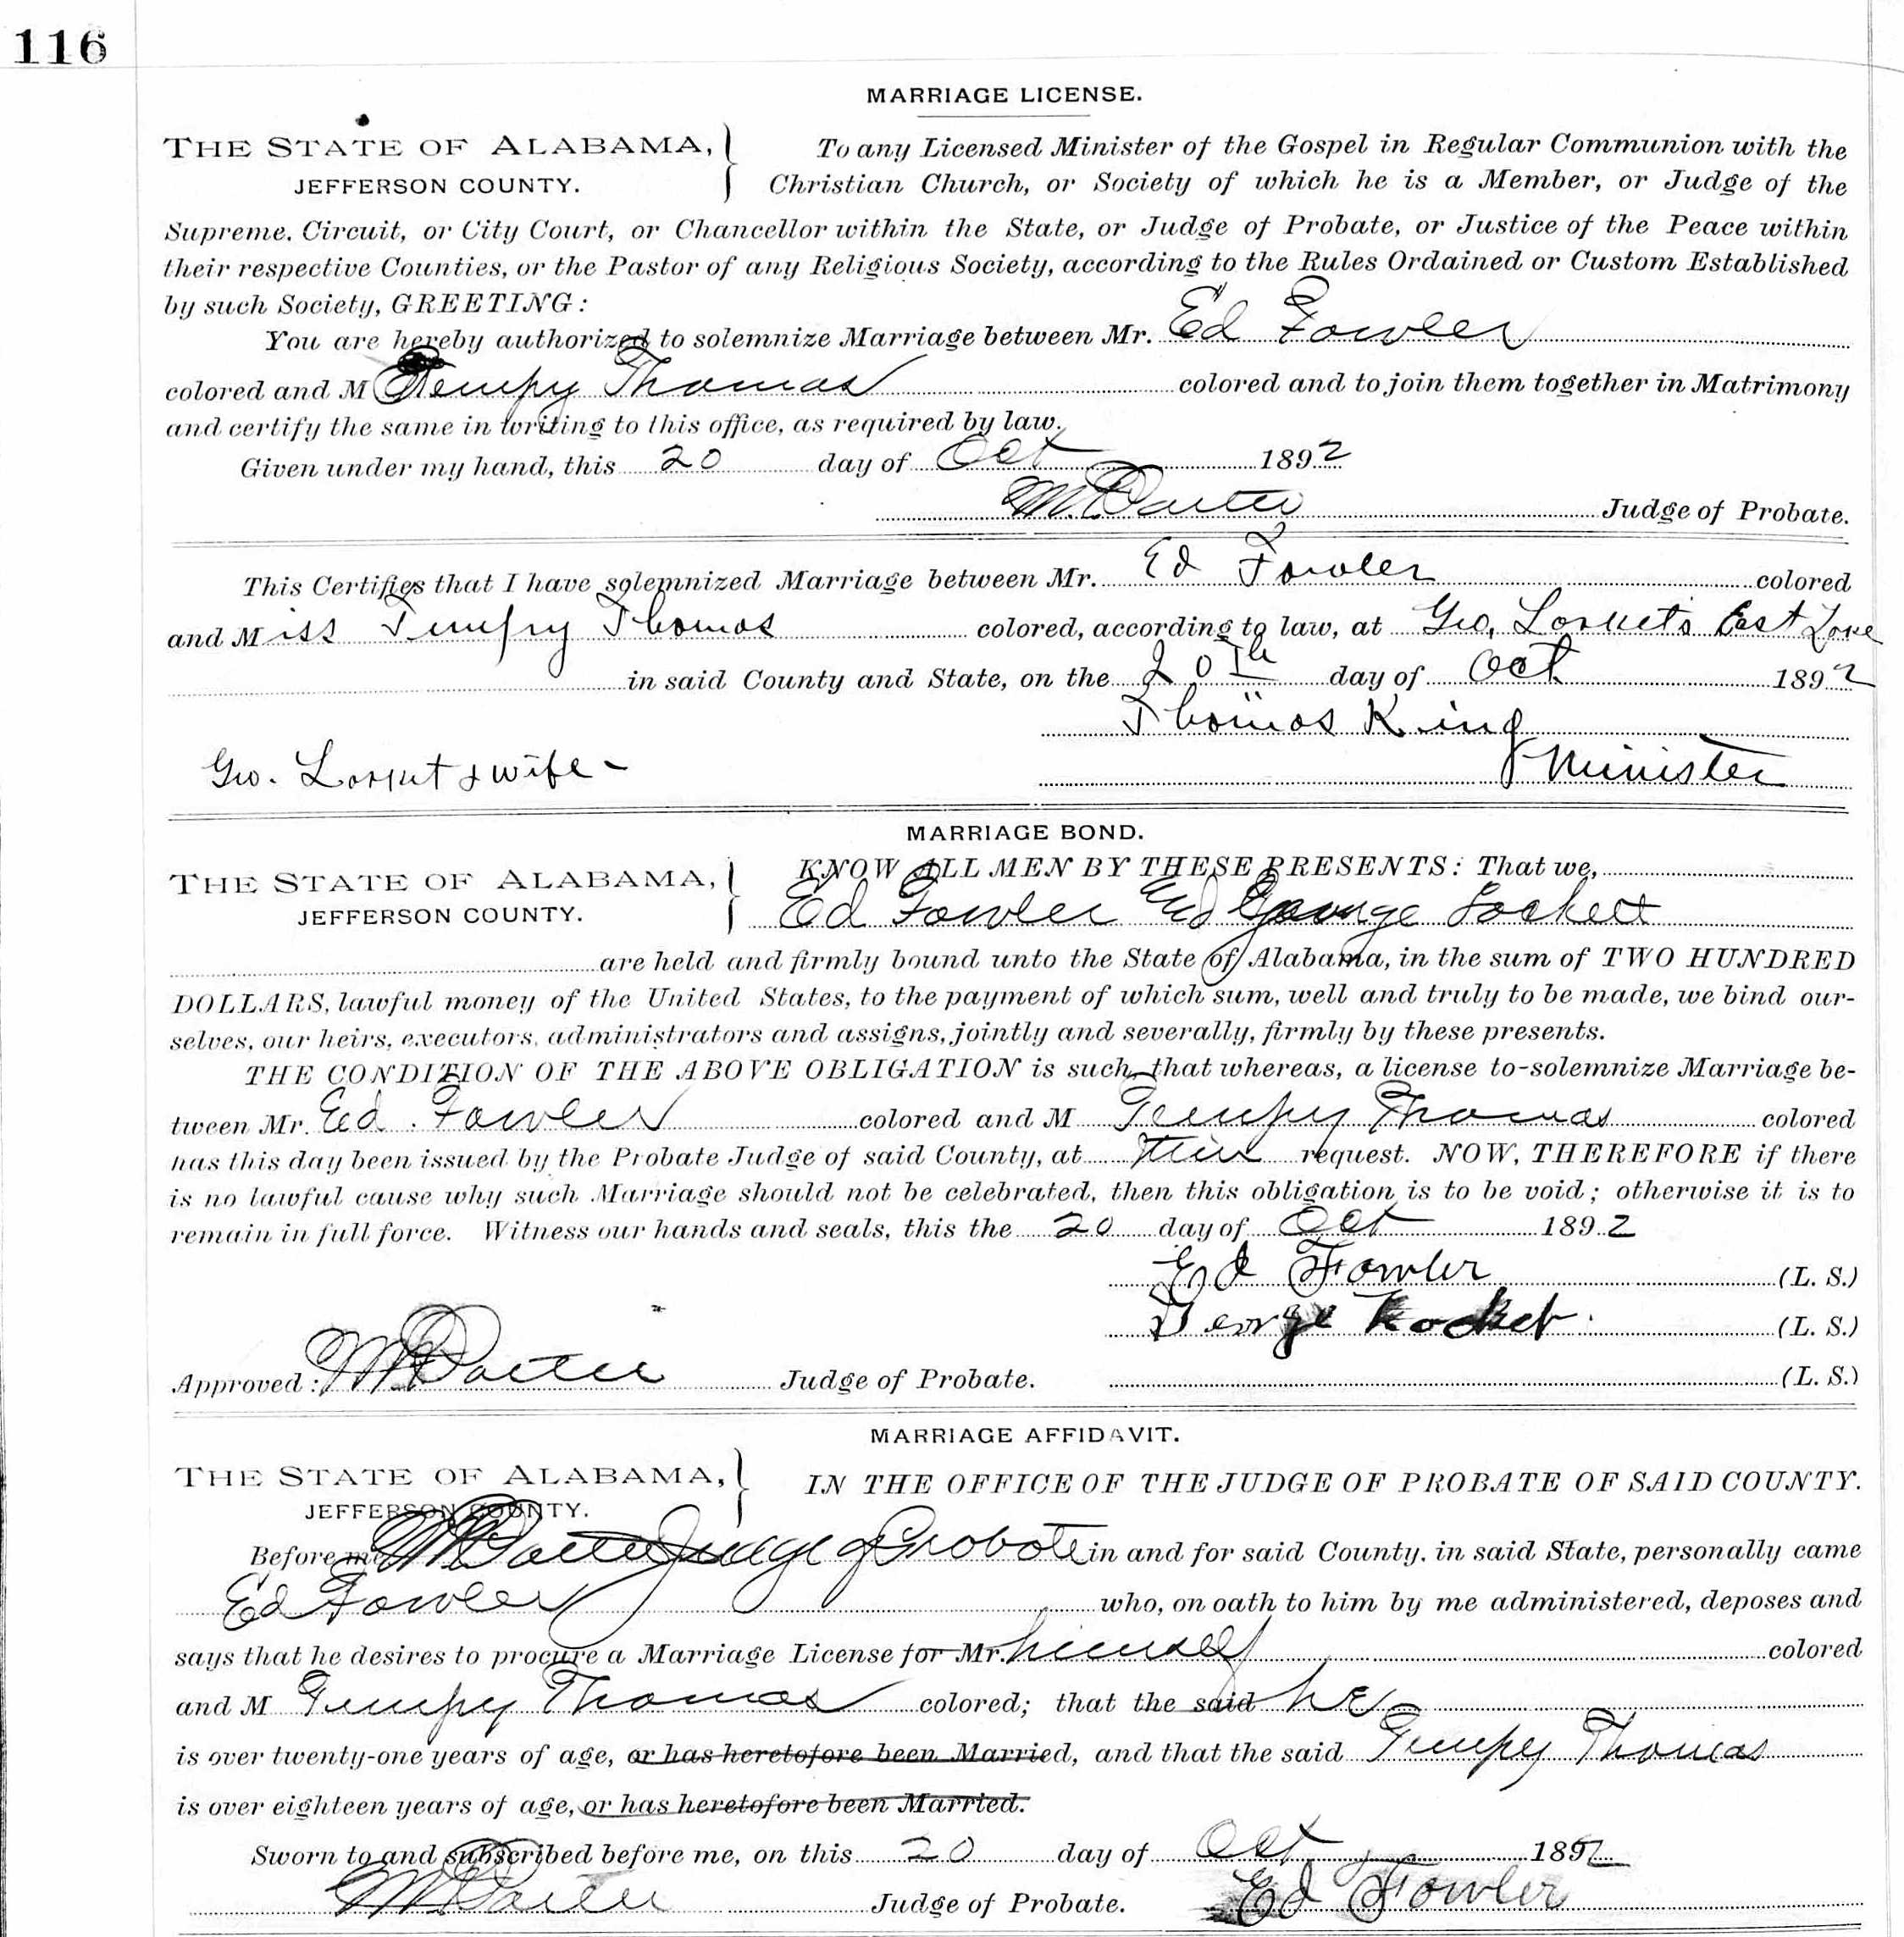 Ed Fowler and Tempy Thomas marriage, October 20, 1892